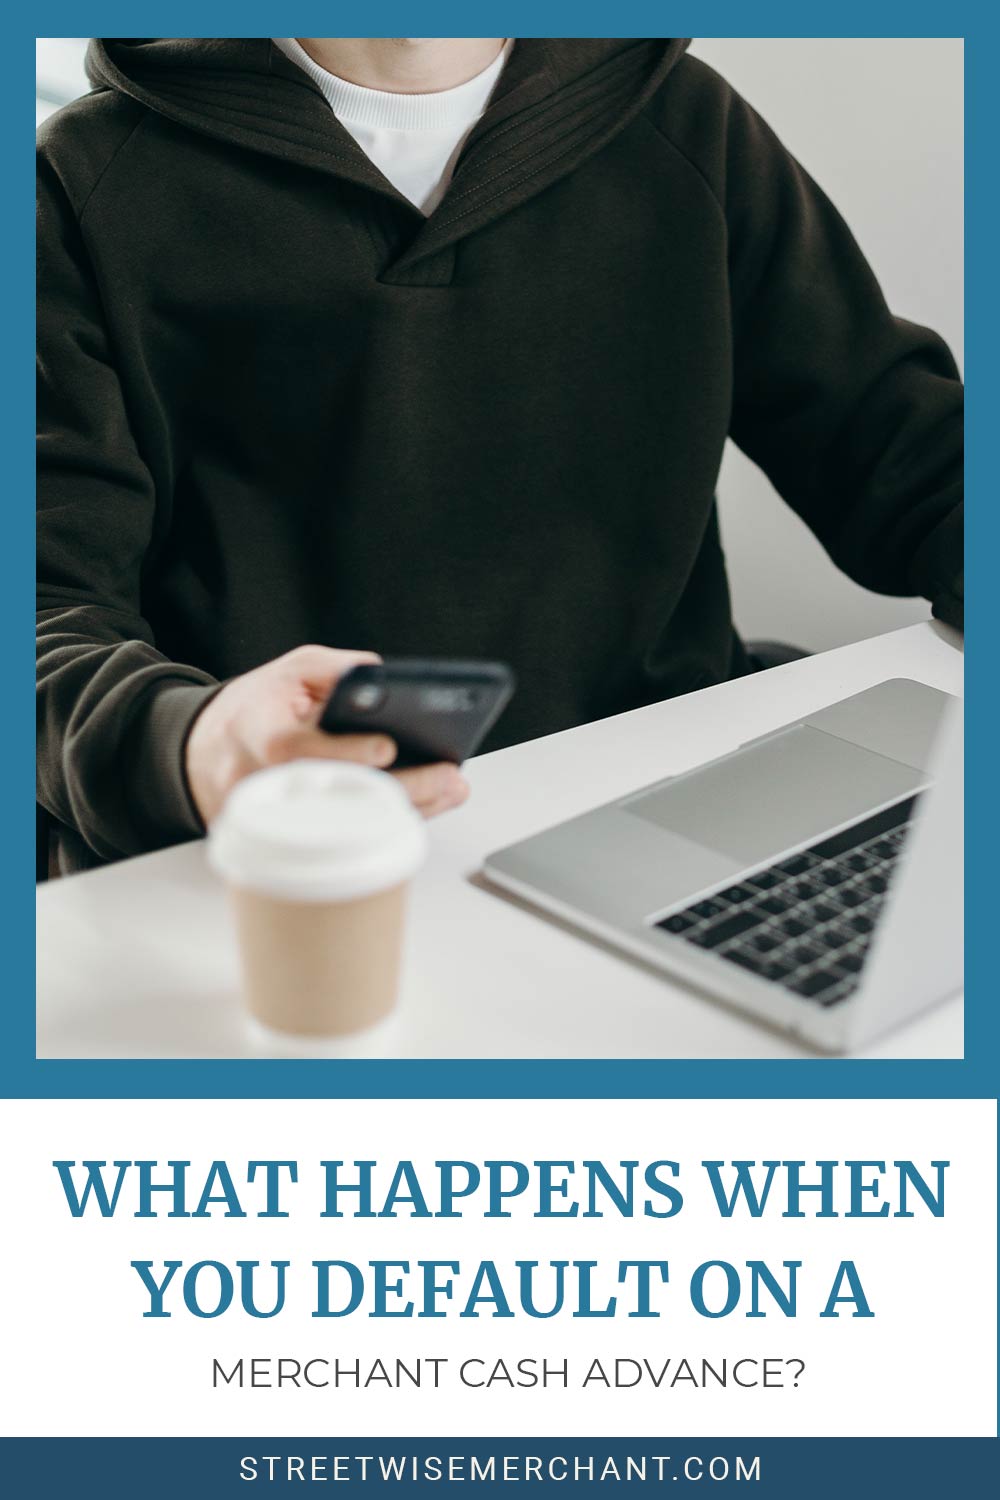 Personn wearing black hoodie workinh on laptop and holding a mobilephone - What Happens When You Default On a Merchant Cash Advance?